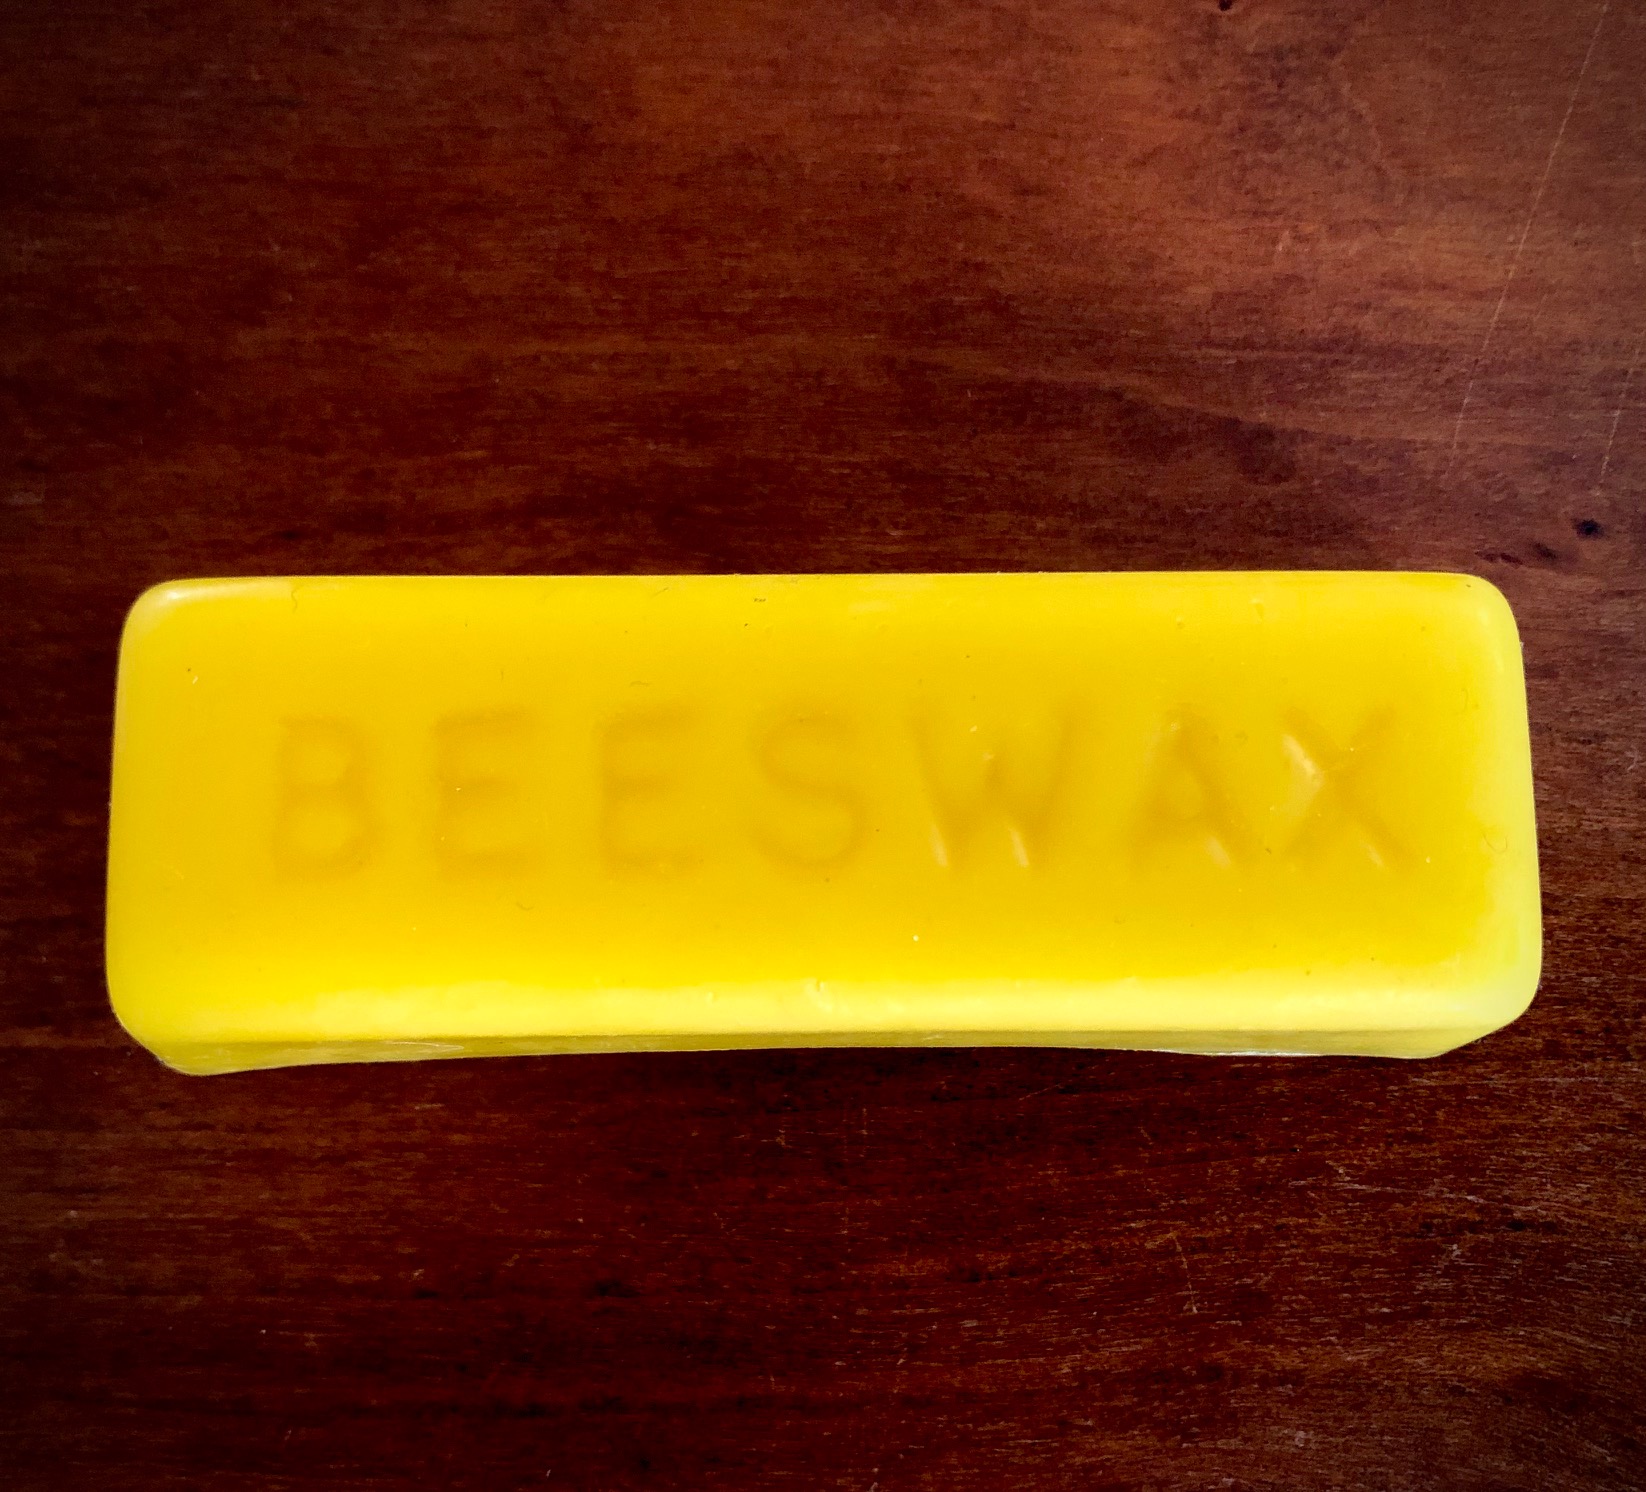 Common Tread All Natural Beeswax Leather Balm